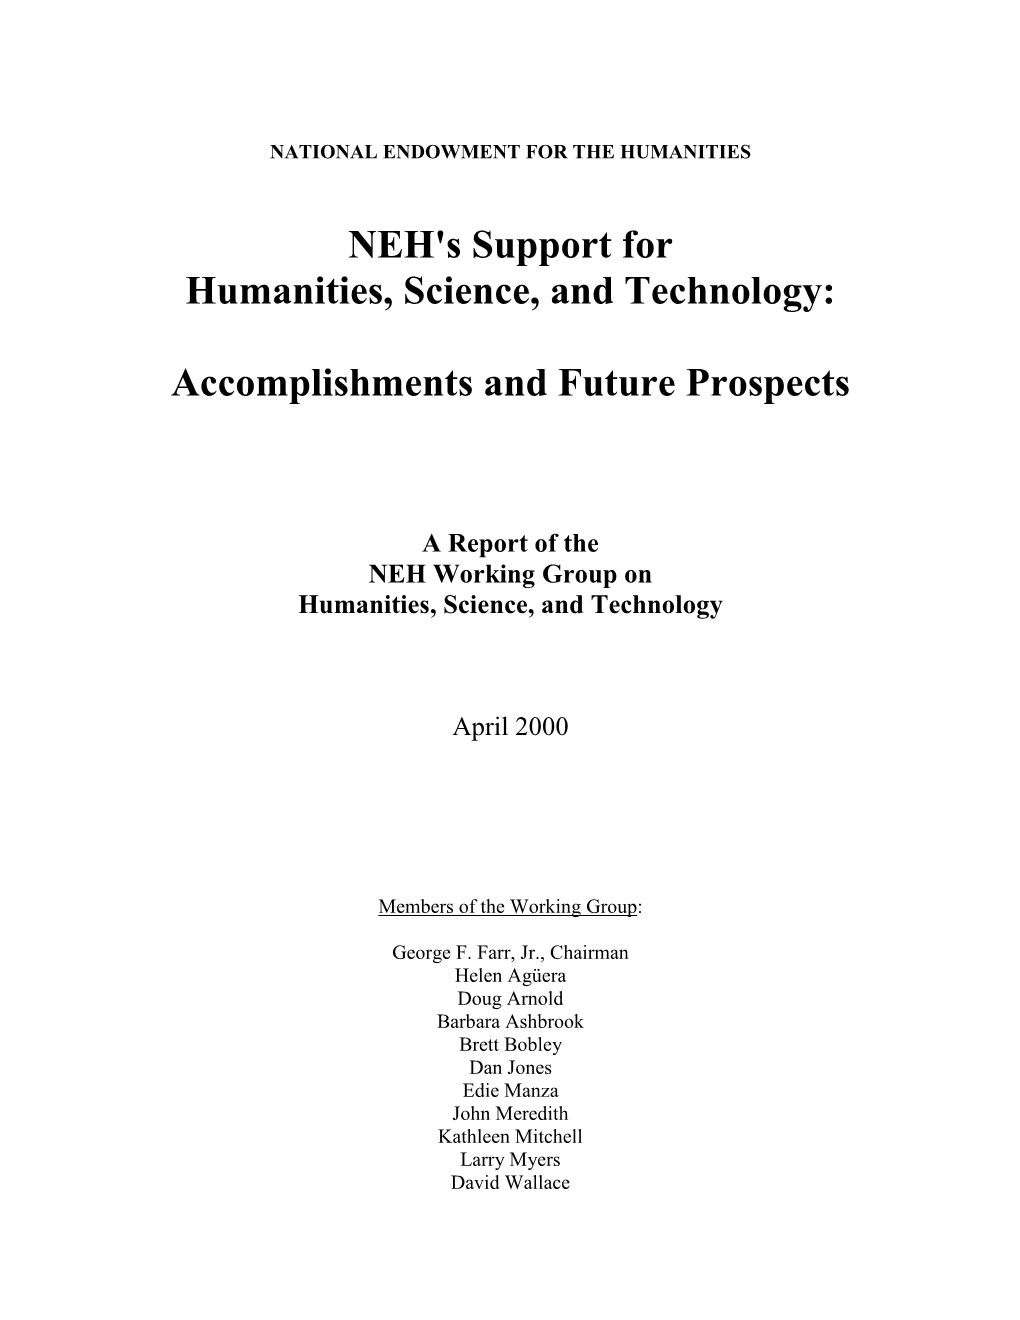 NEH's Support for Humanities, Science, and Technology